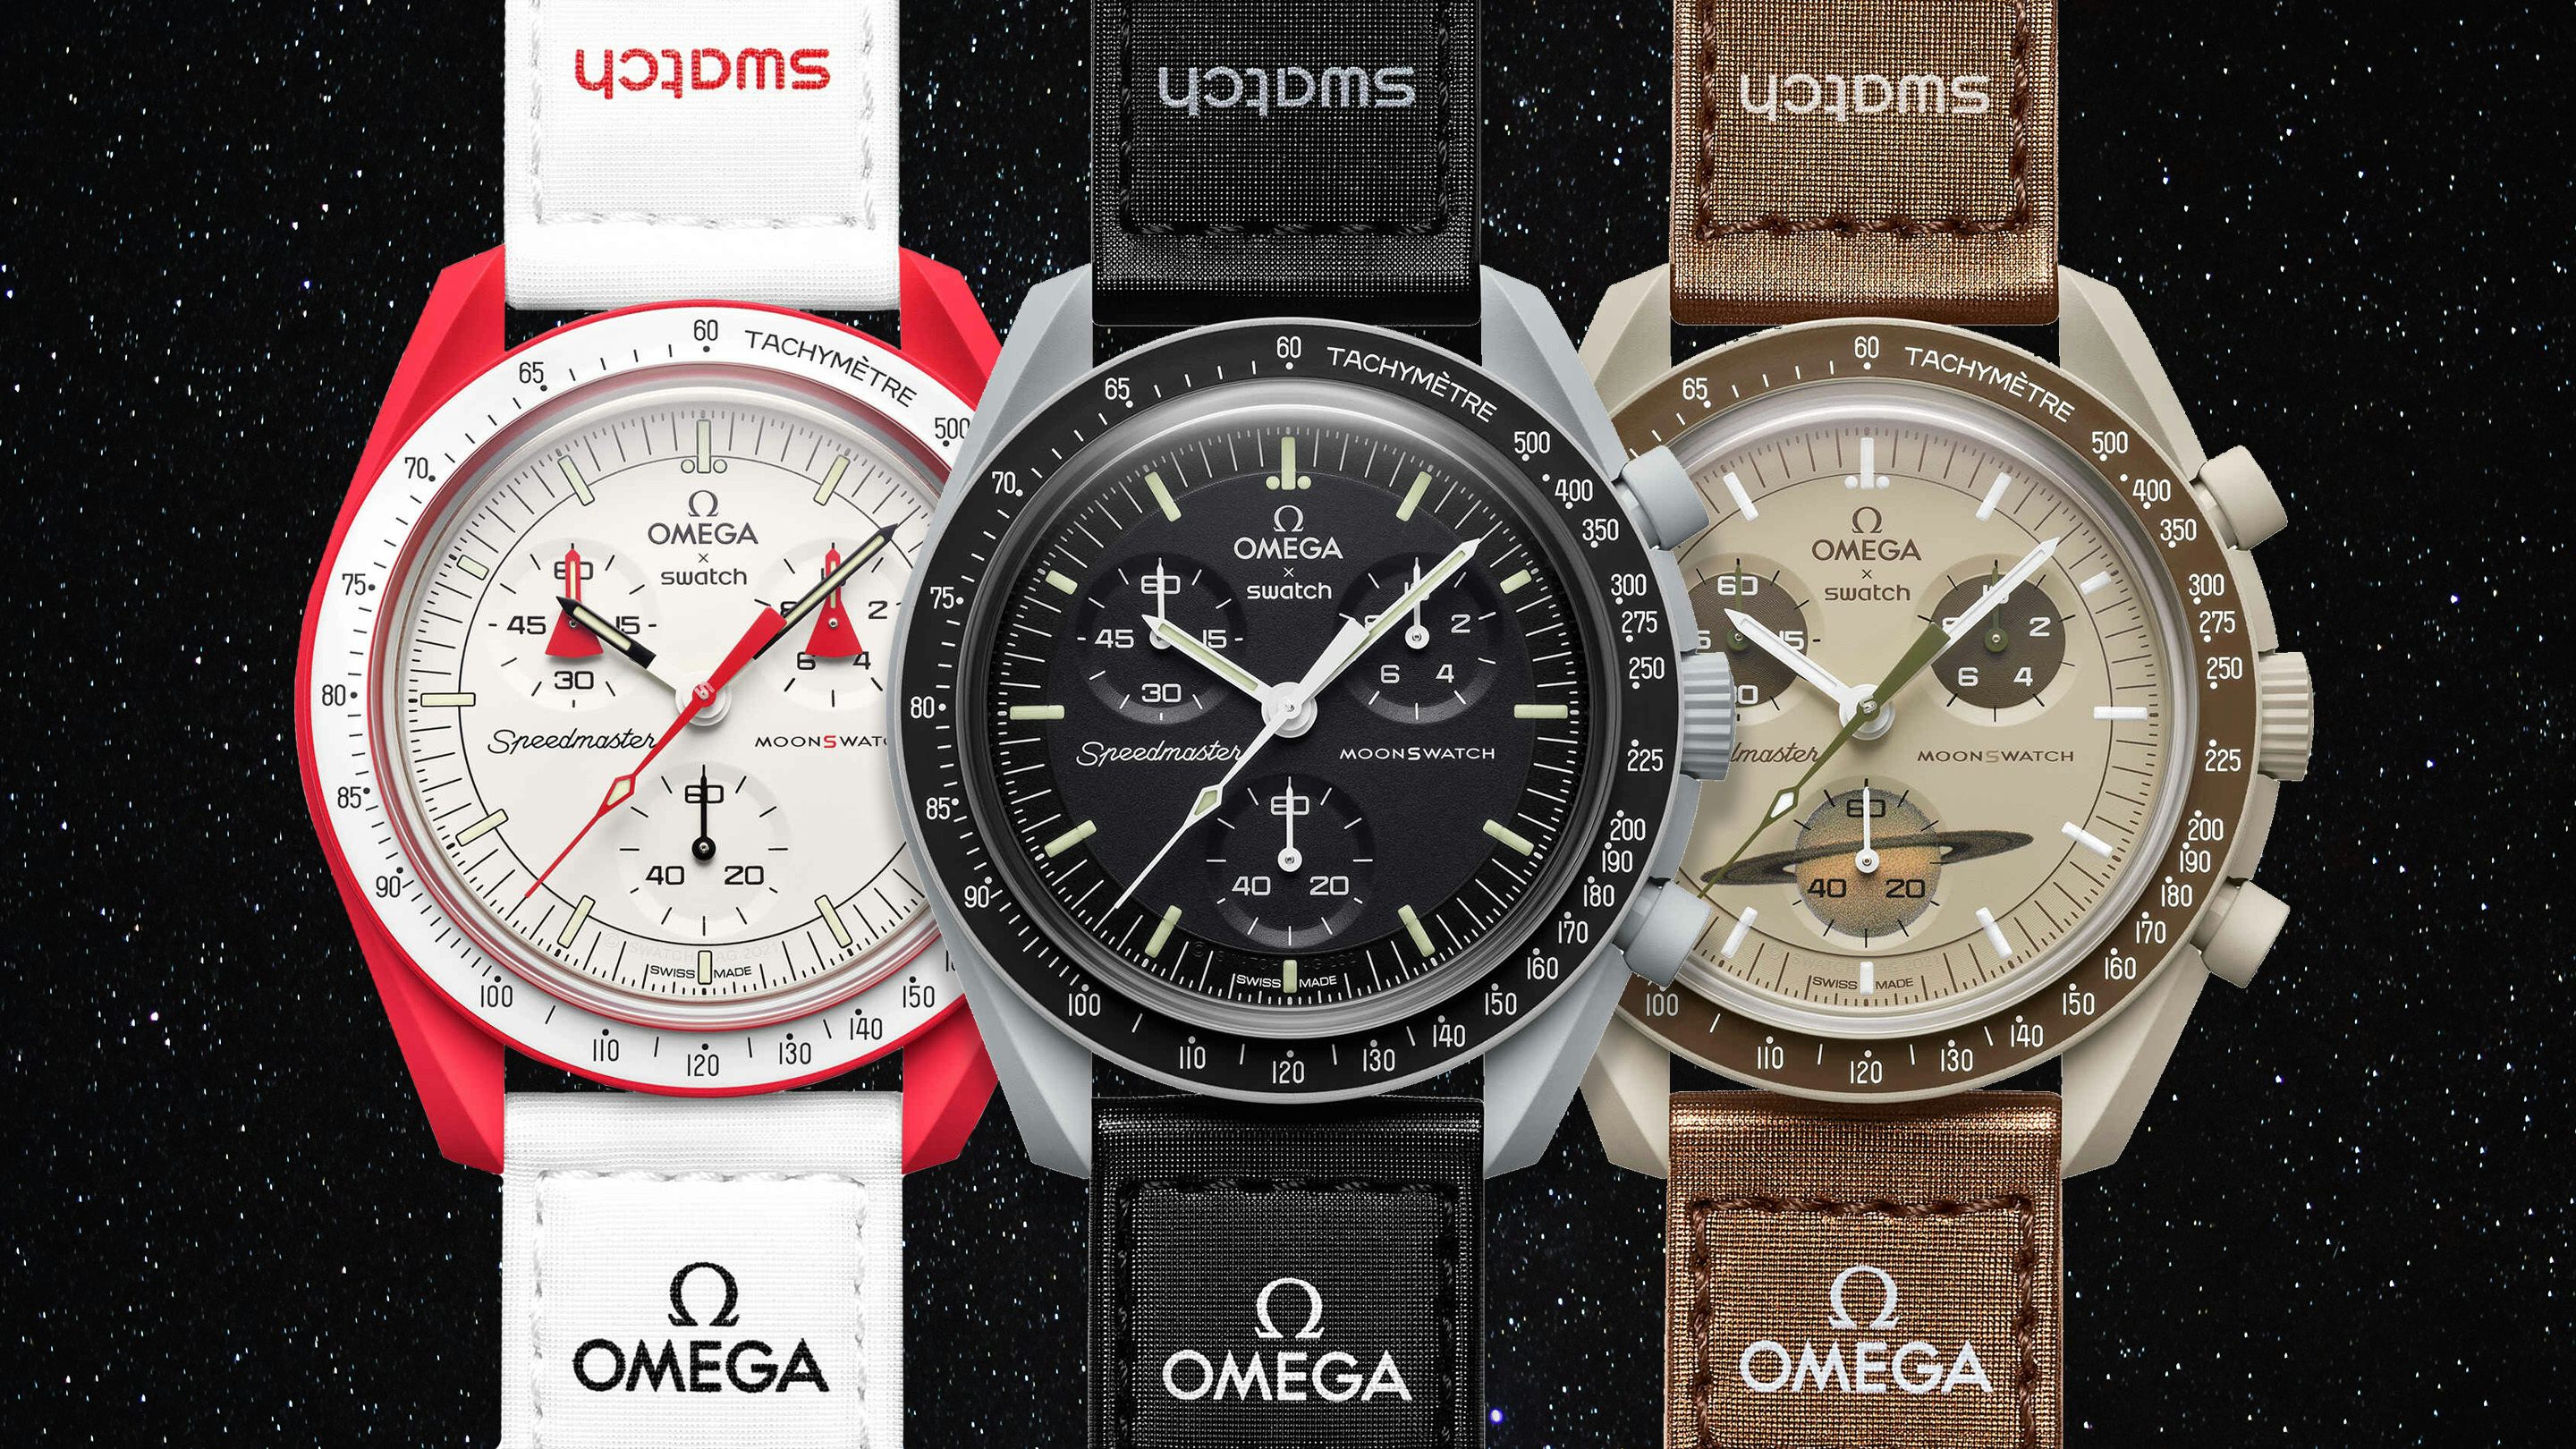 Just Moonwatch a Release Swatch and $300? Did under Omega